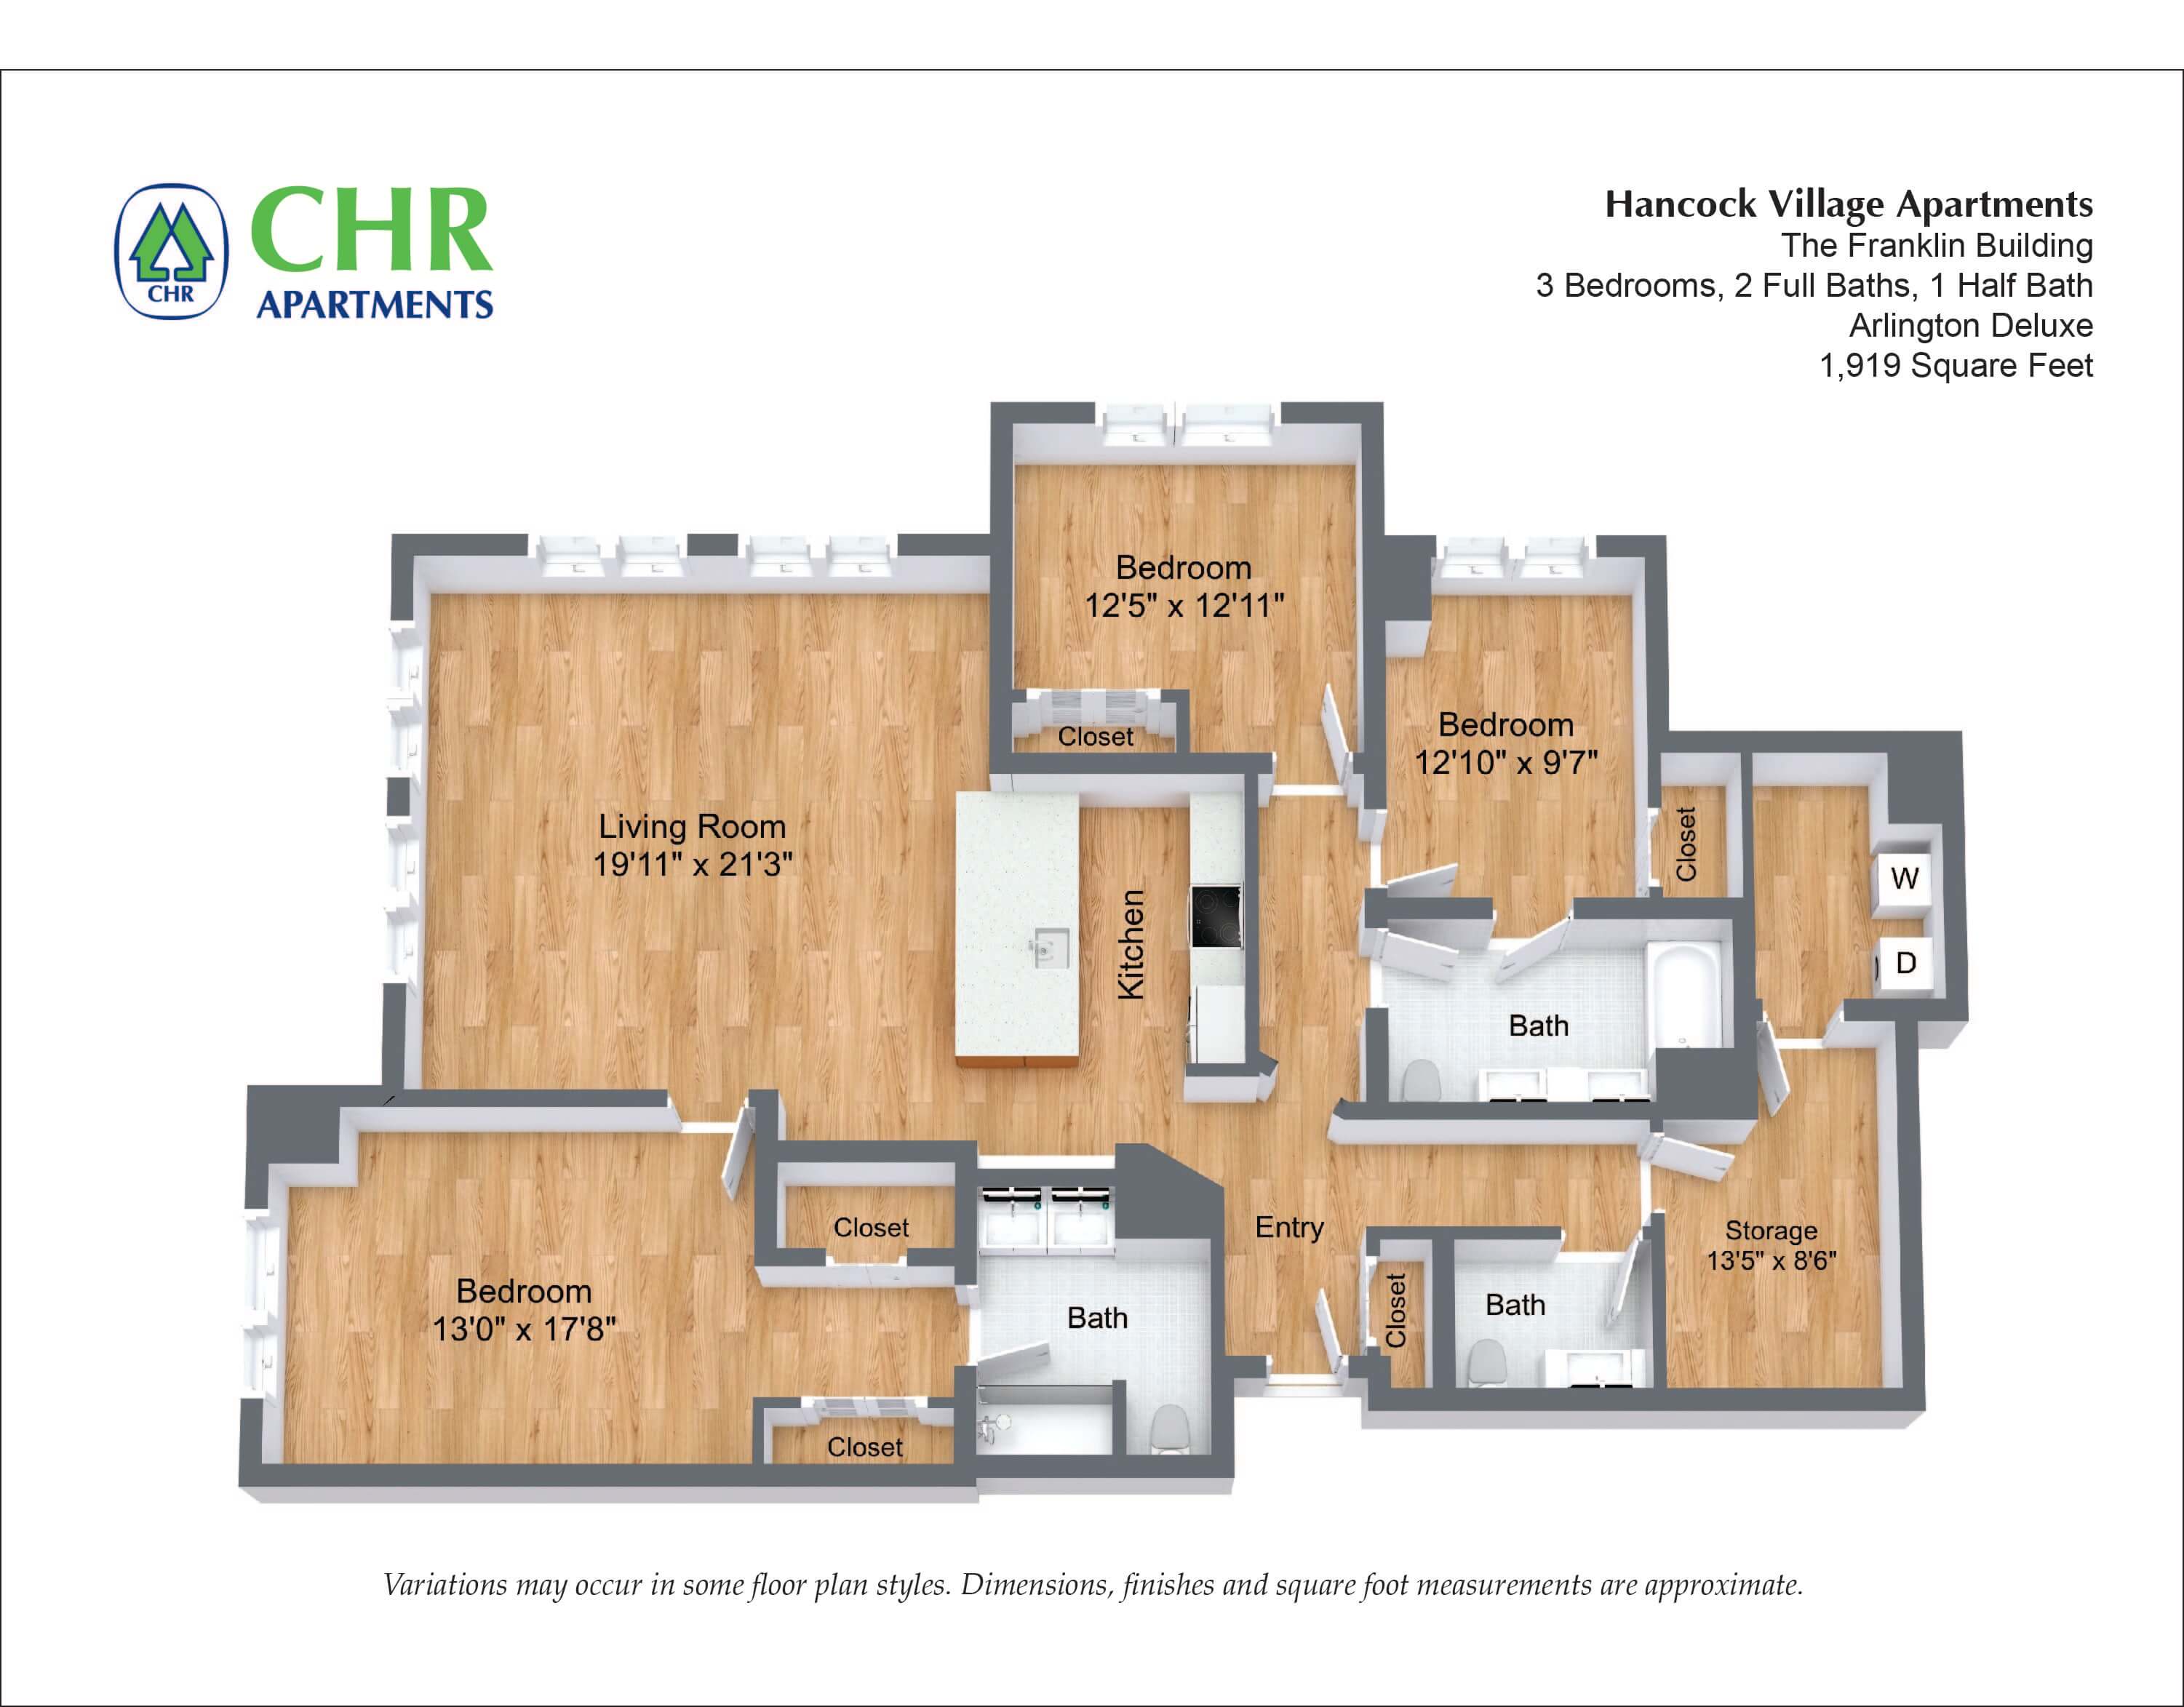 Click to view 3 Bed/2.5 Bath floor plan gallery